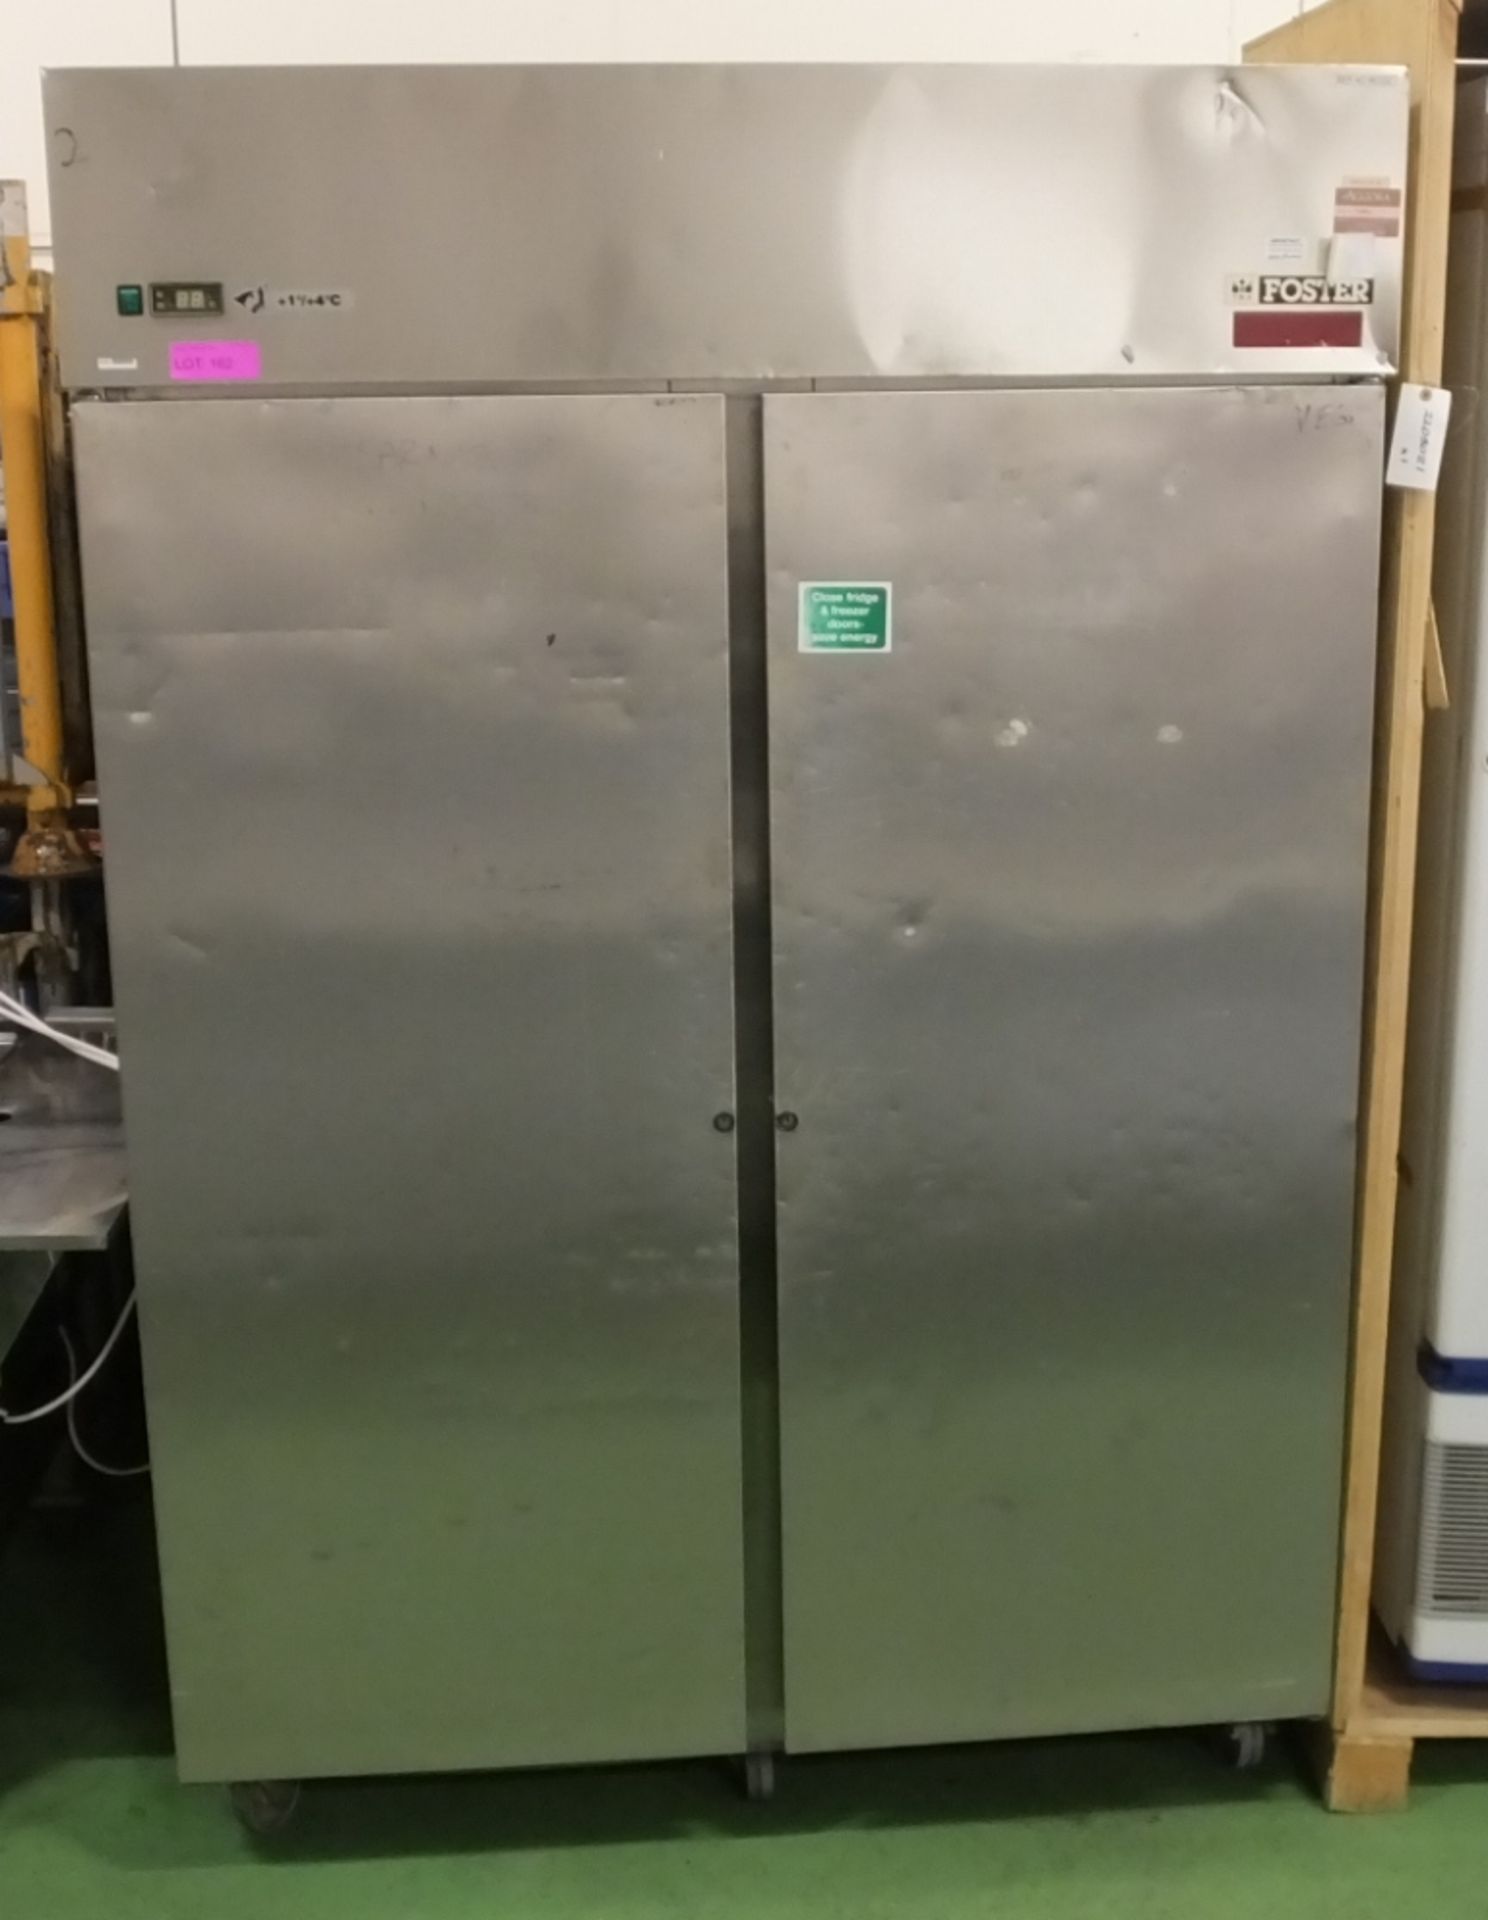 Foster PS1350 HT R134A Refrigerator Double Door - AS SPARES OR REPAIRS